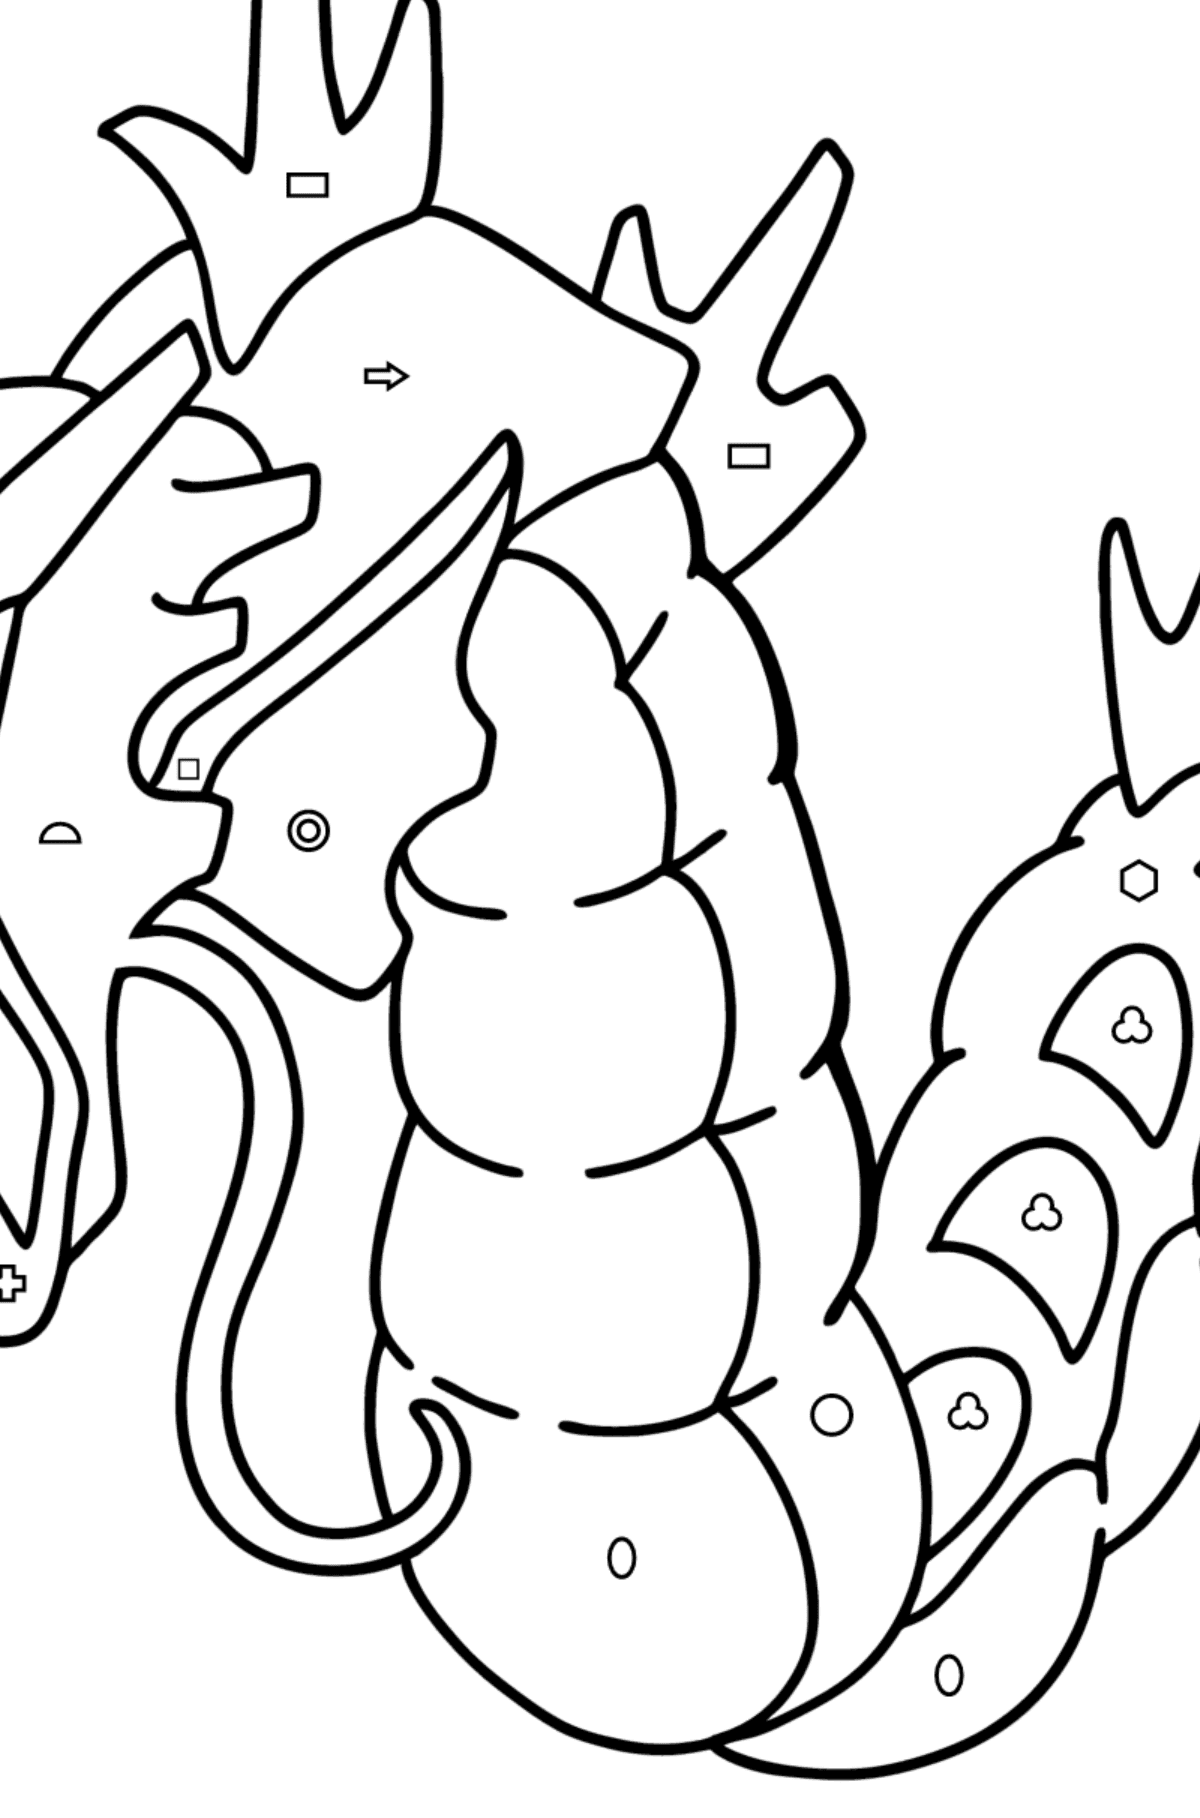 Coloring page Pokemon Go Gyarados - Coloring by Geometric Shapes for Kids